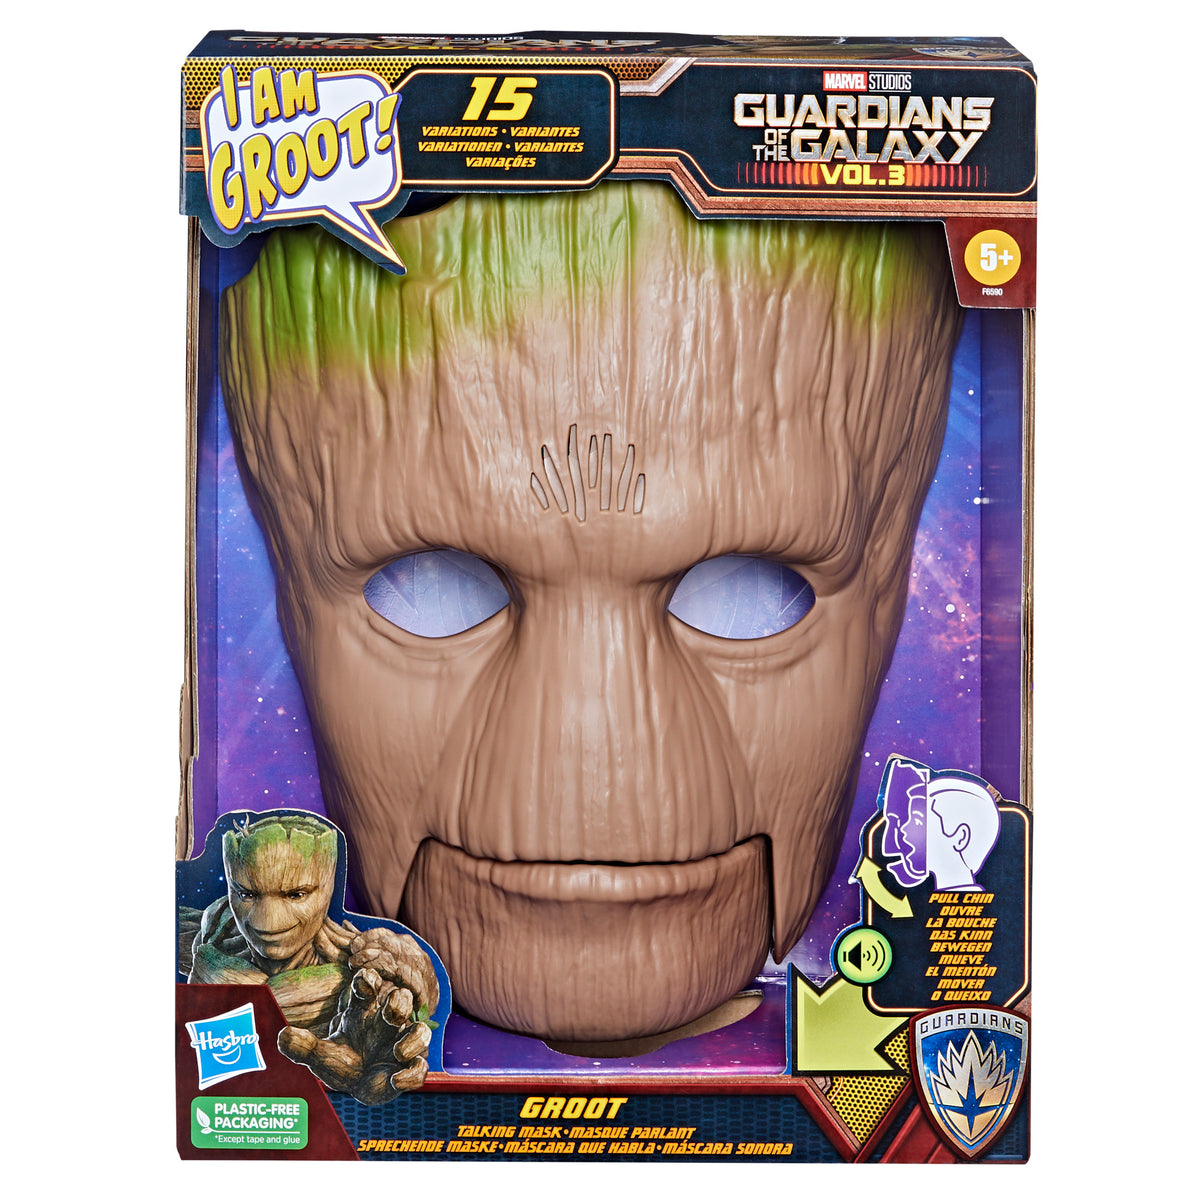 3 - Groove´n Groot - Interaktive Actionfigur, Guardians Of The Galaxy  Actionfigur